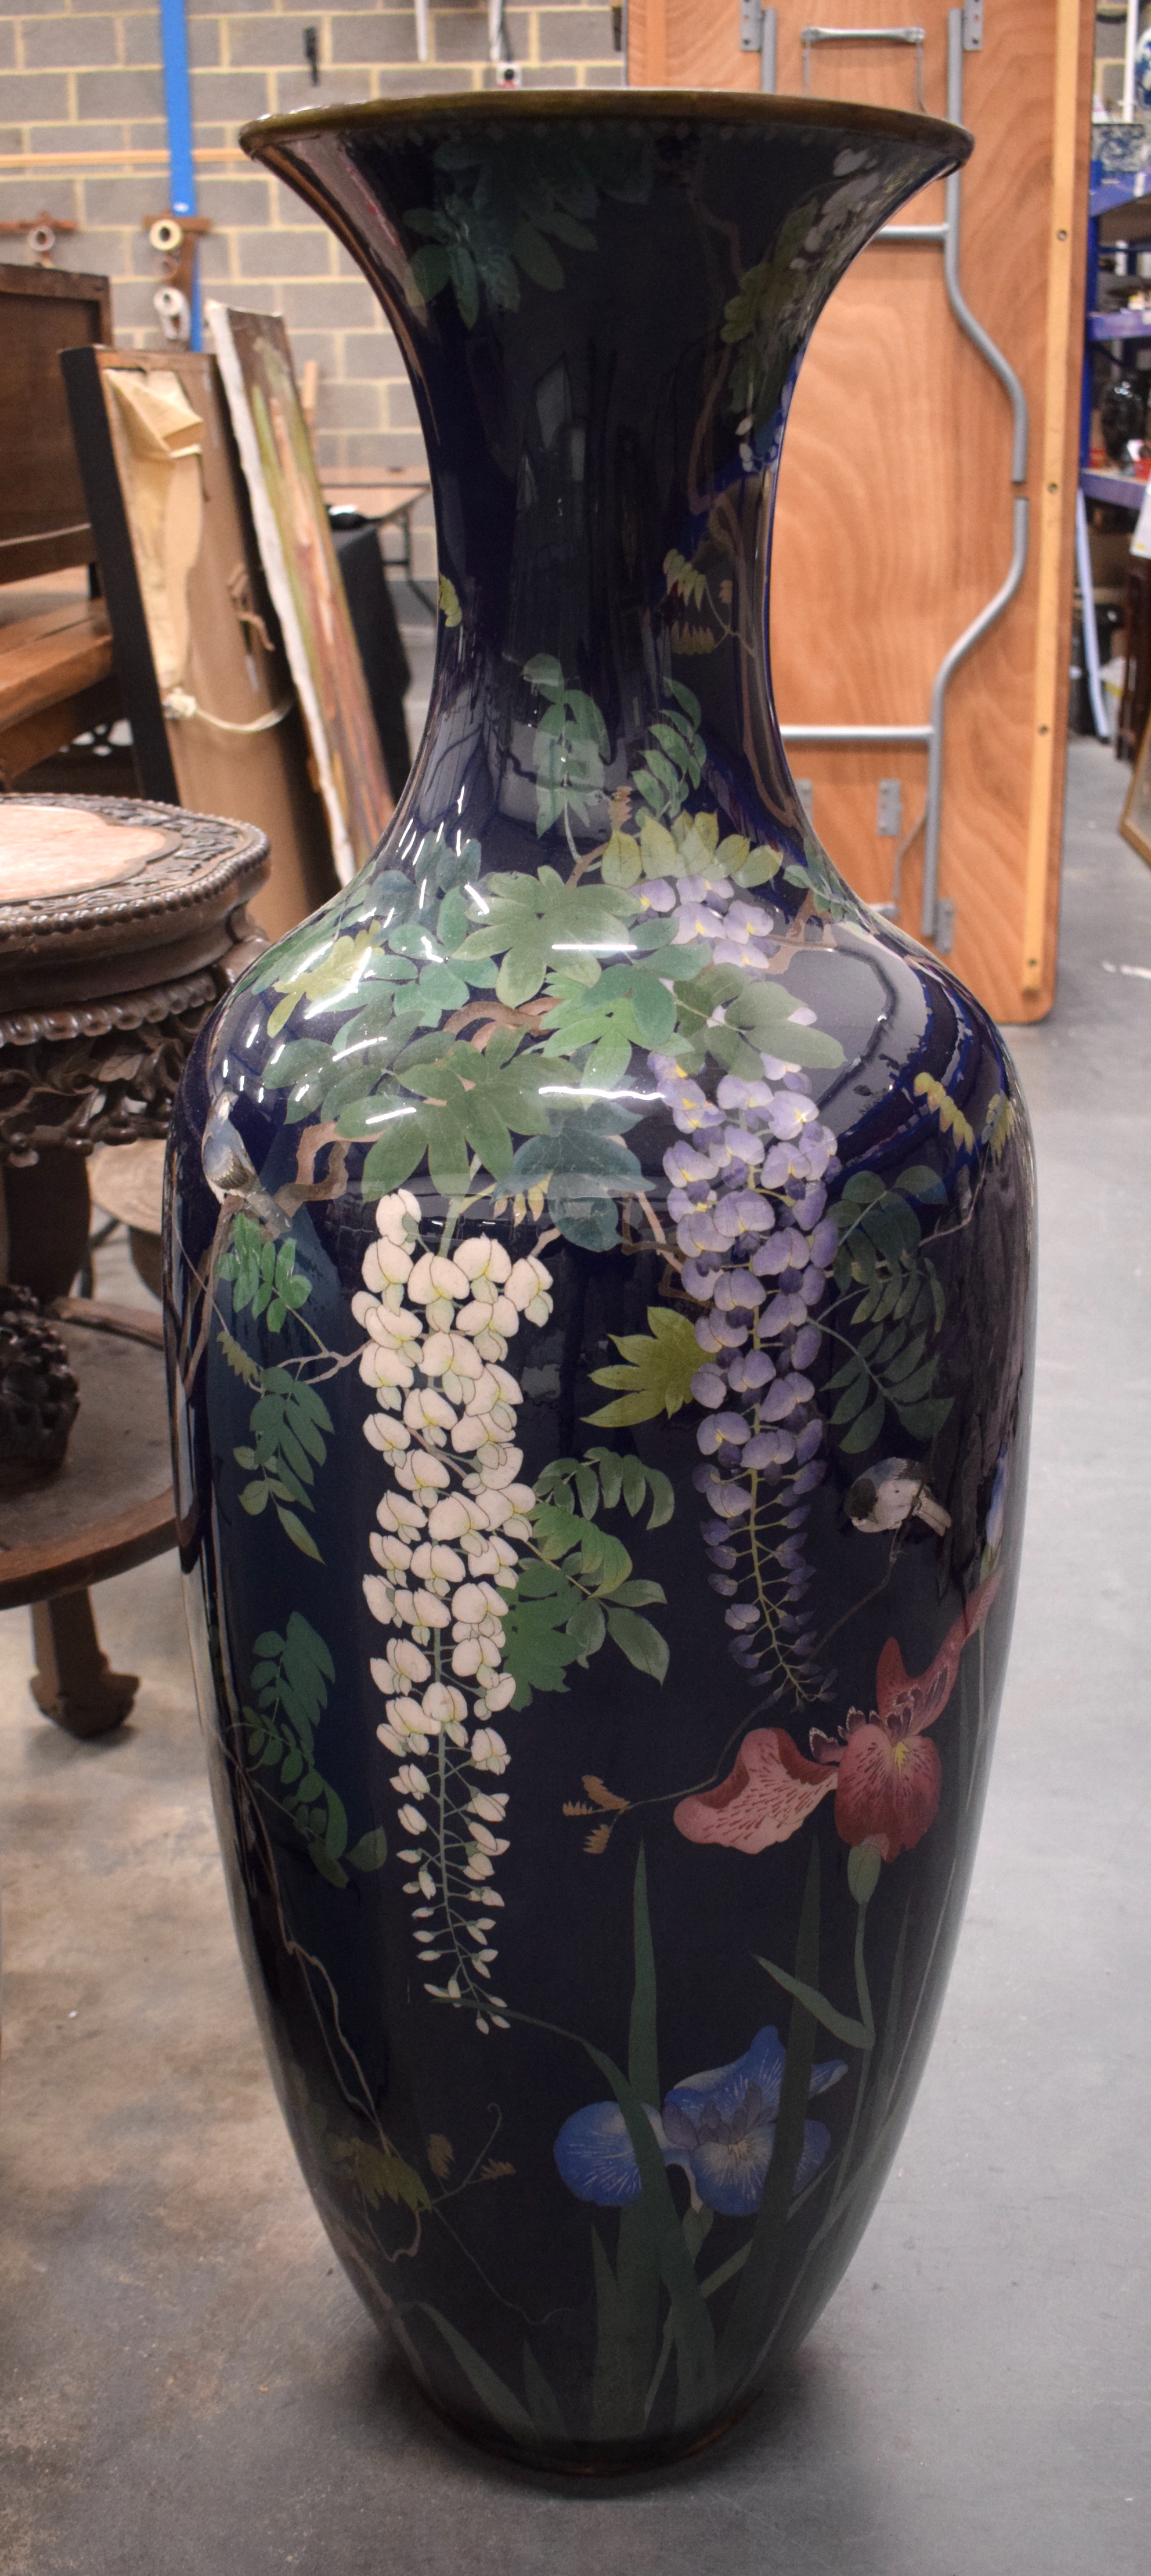 A VERY LARGE 19TH CENTURY JAPANESE MEIJI PERIOD CLOISONNE ENAMEL VASE decorated with birds and flowe